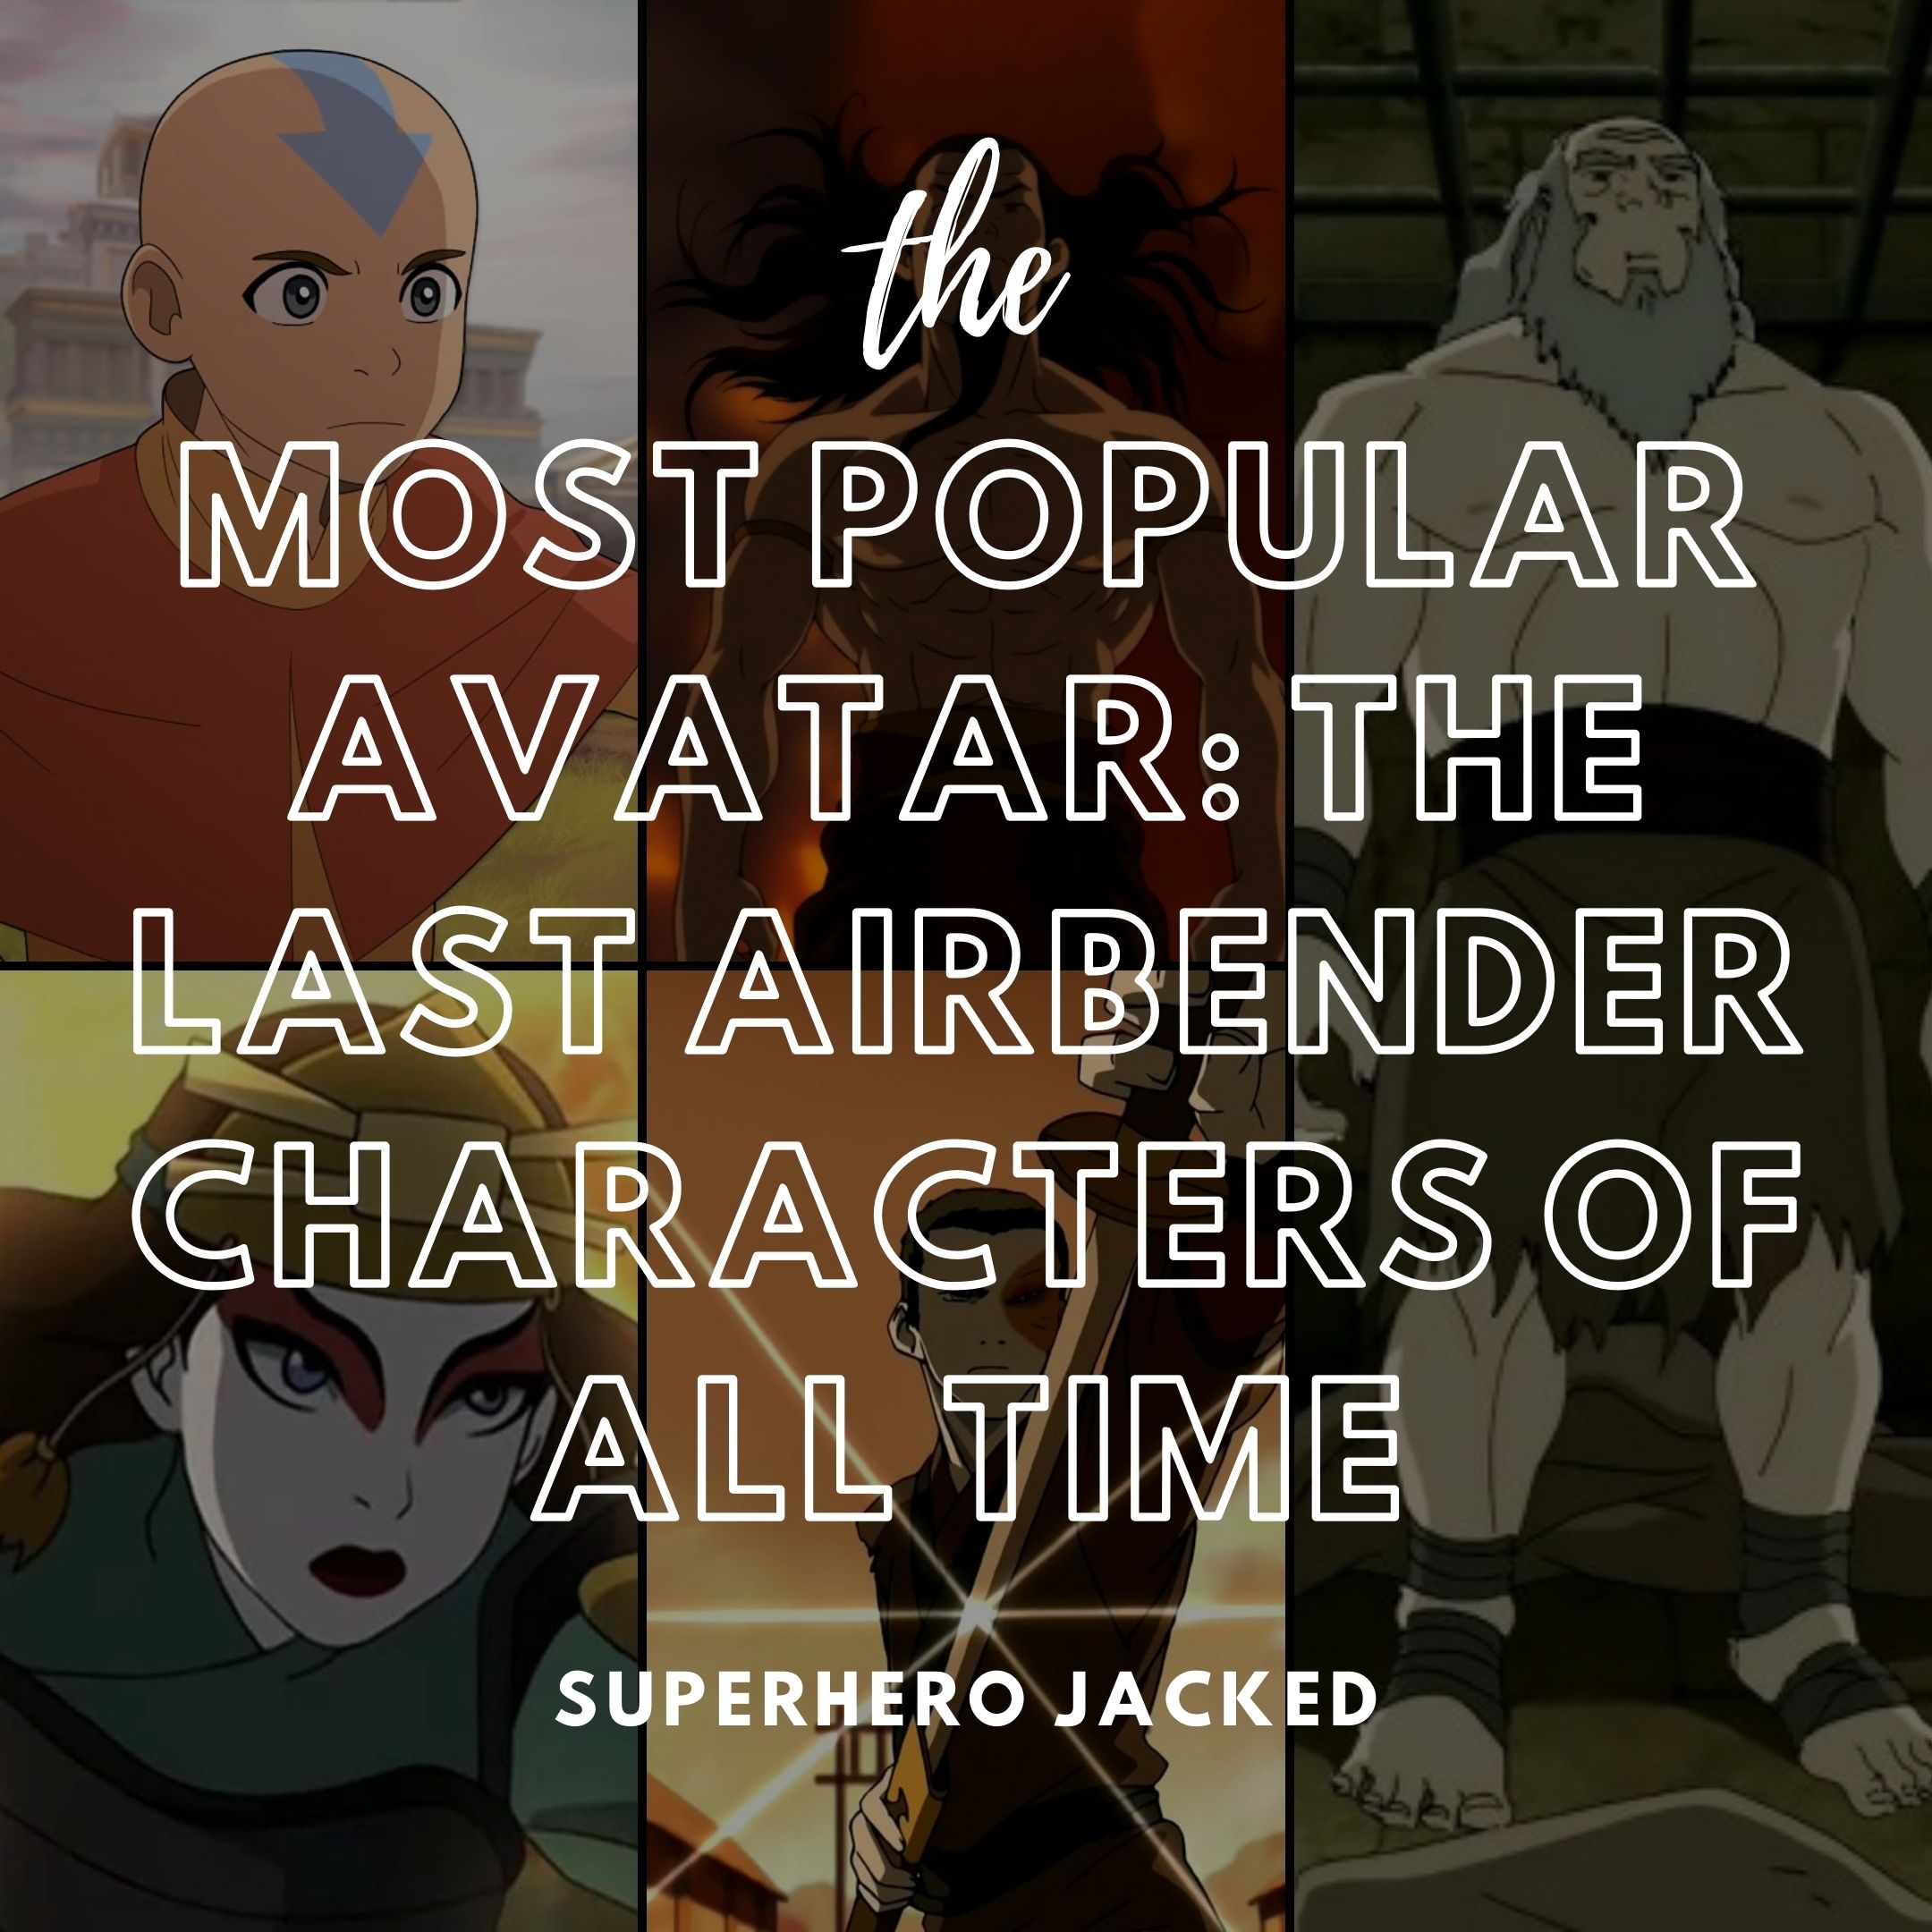 Favourite Avatar The Last Airbender Characters by x22 on DeviantArt